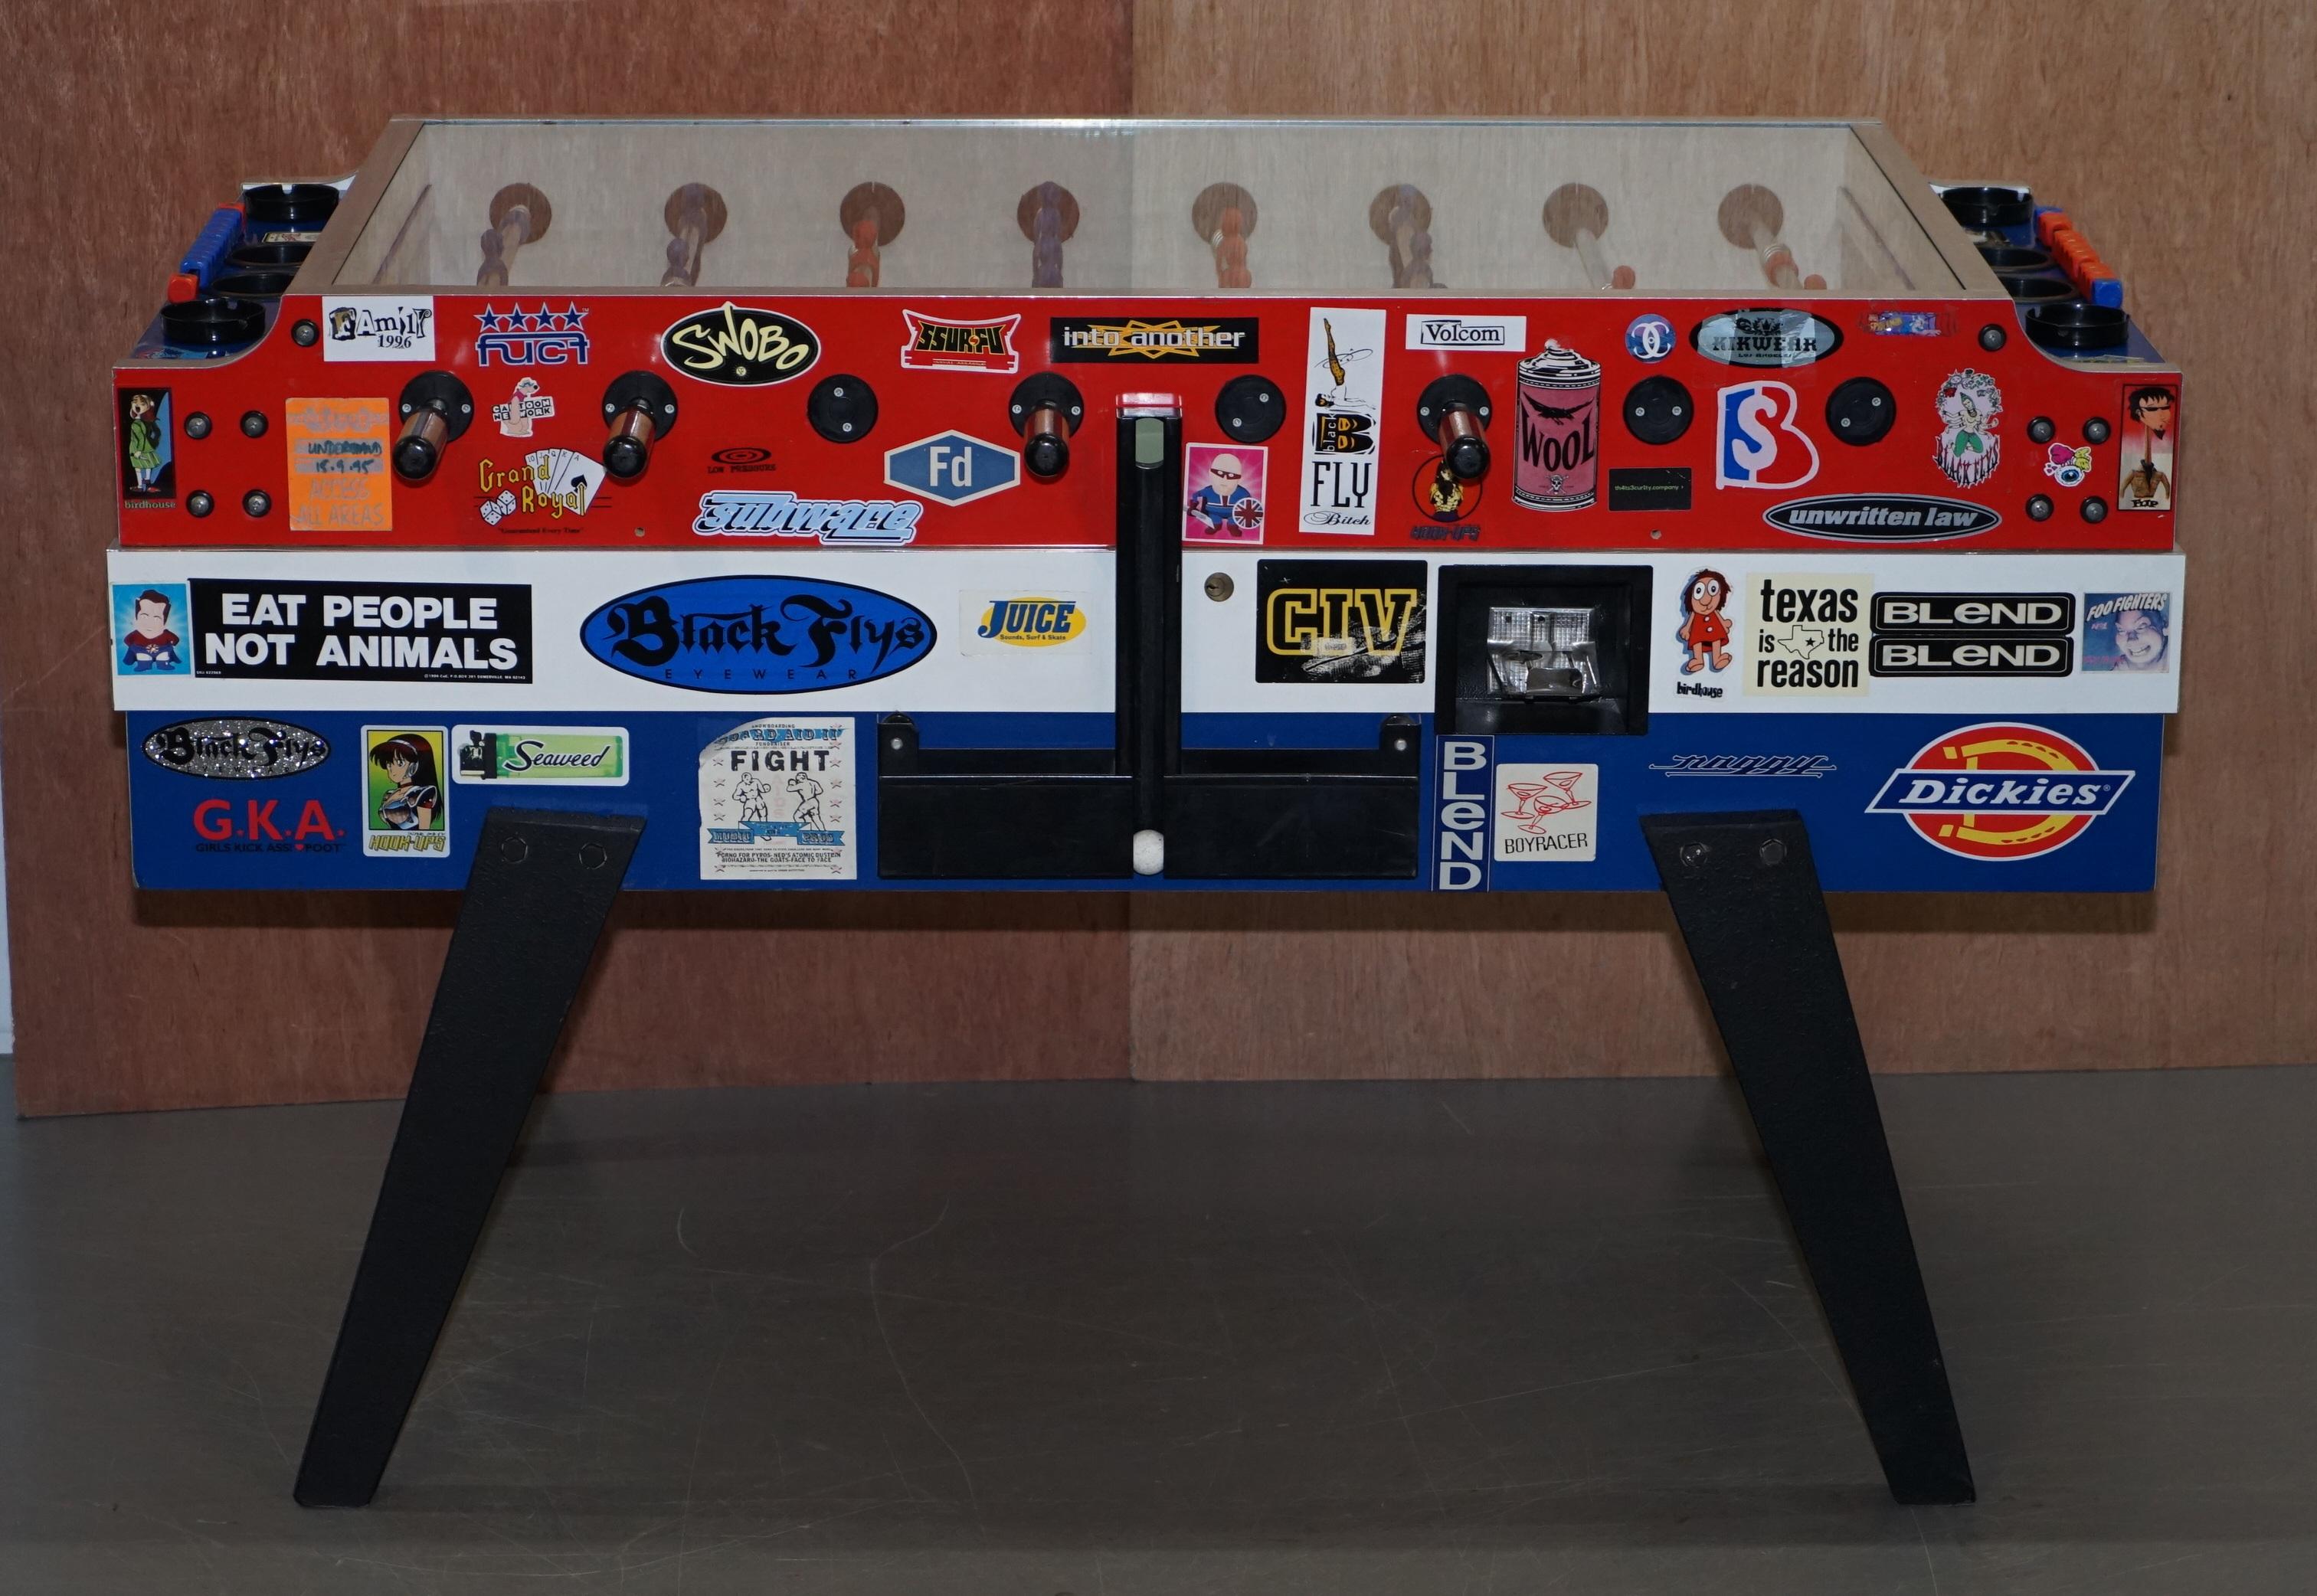 We are delighted to offer this lovely vintage foosball table covered in pop culture stickers

A very good looking well made and decorative piece, it has been perfectly decorated with pop culture, political and comical stickers, this is ready to go